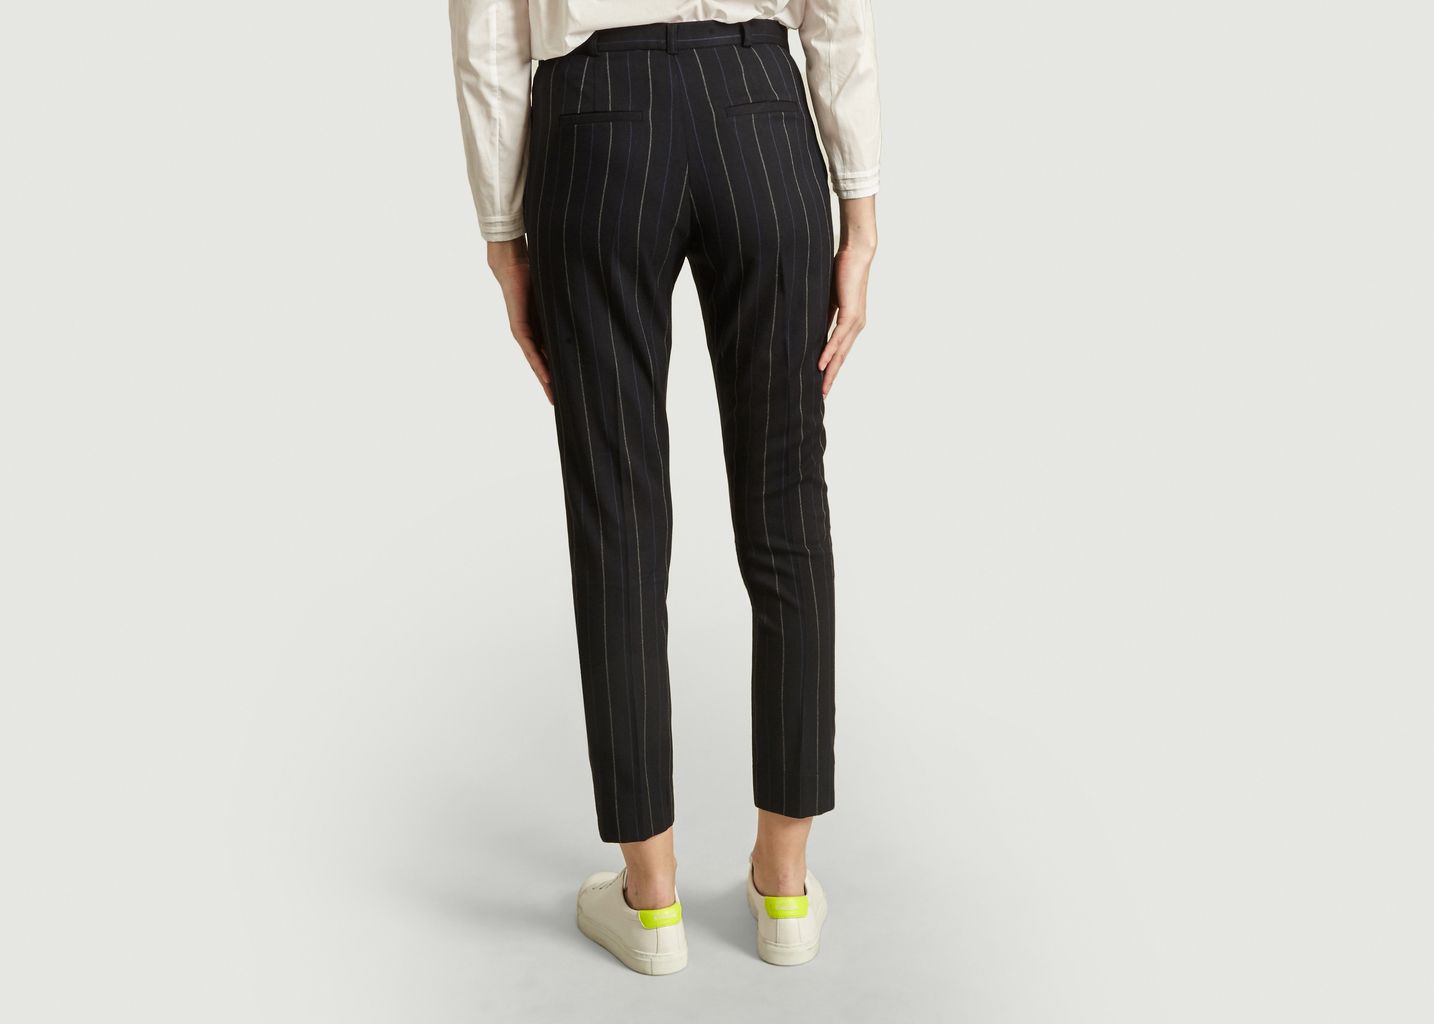 George tailored trousers with tennis stripes - Admise Paris